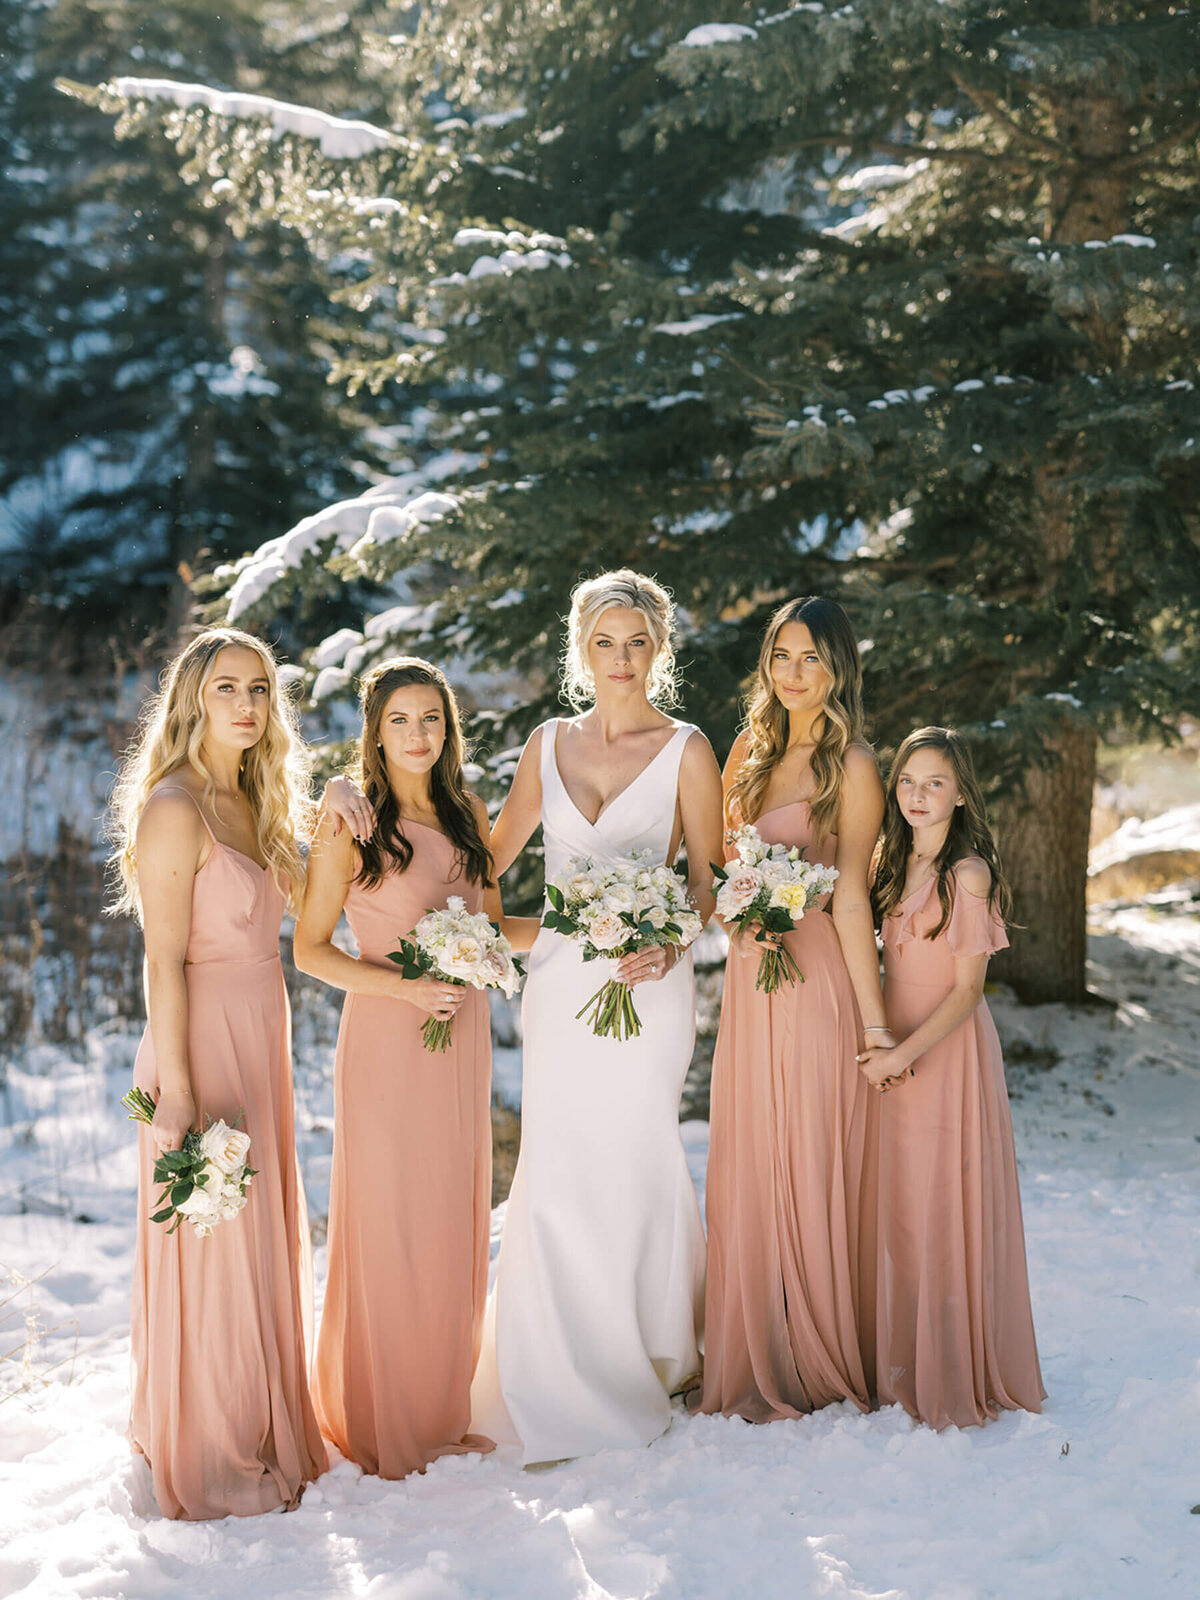 Bride and bridal party in blush dresses at a winter mountain wedding in Vail, Colorado